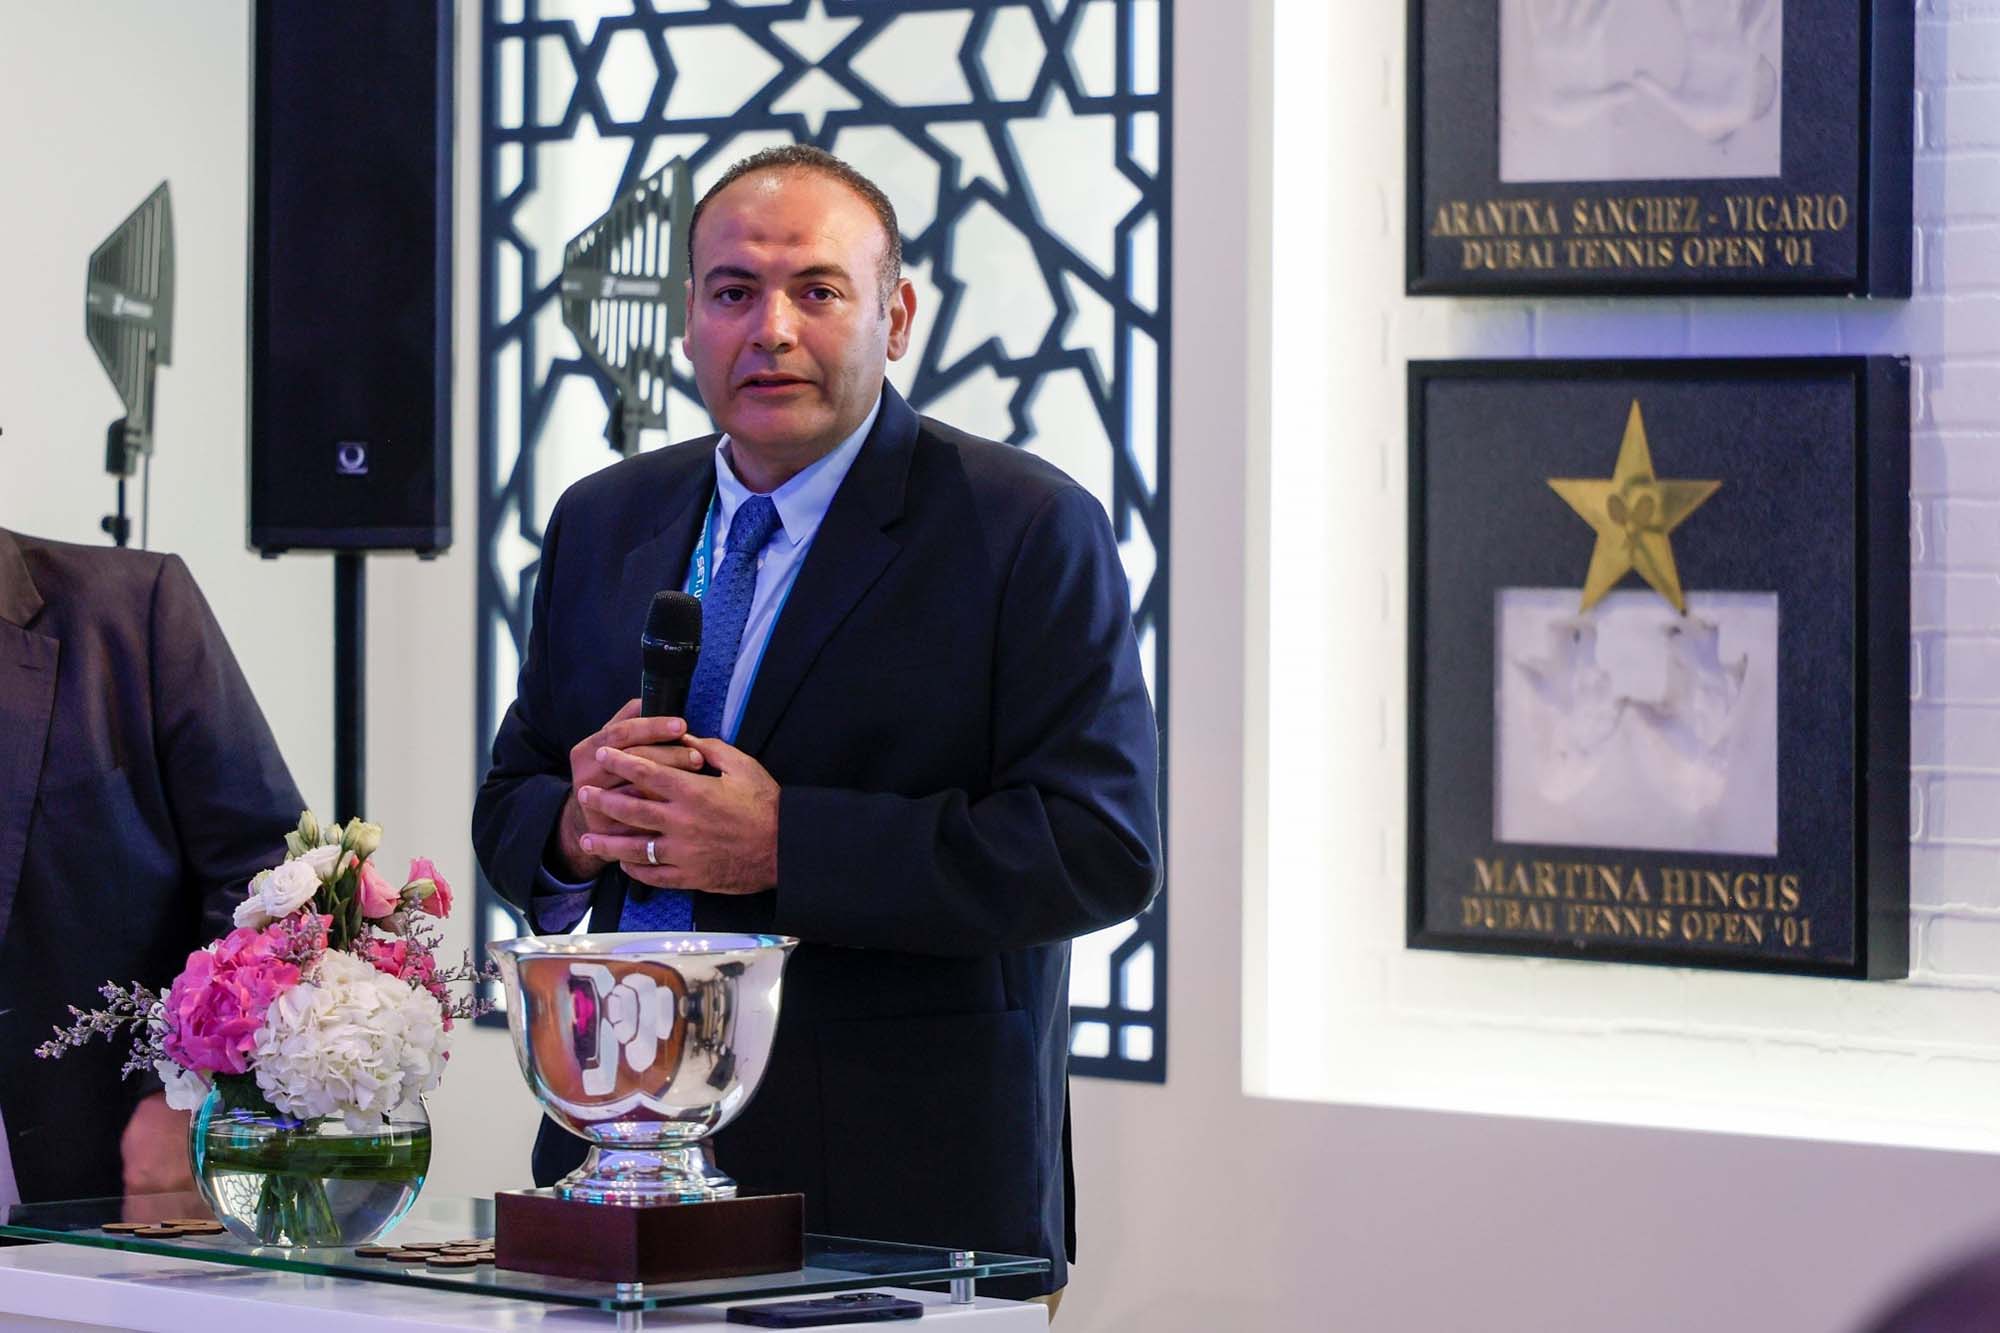 Ahmed Abdel Azim at the draw ceremony for the Dubai tournament